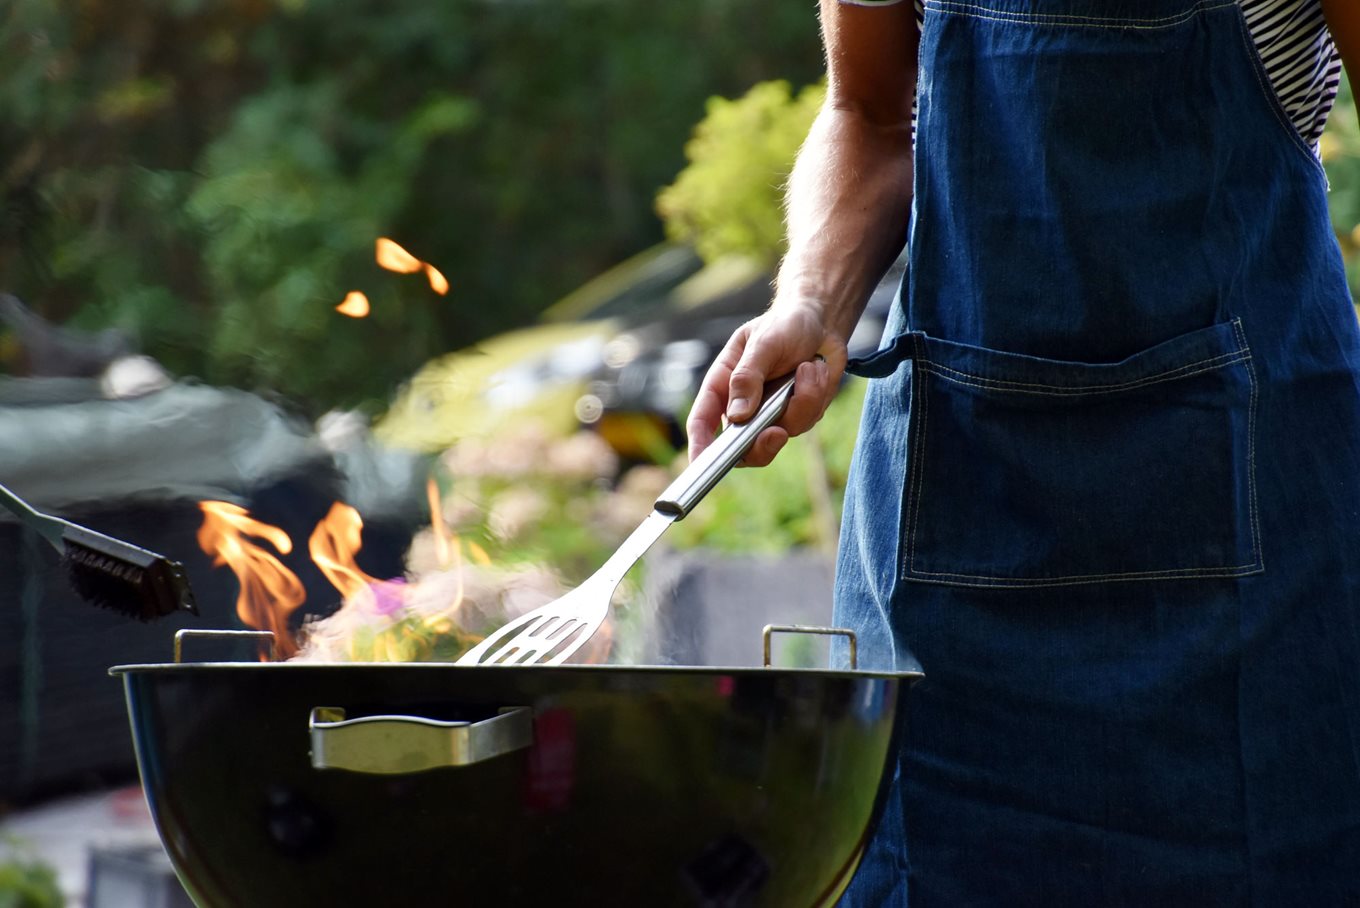 Planning on striking up the barbeque this bank holiday weekend?